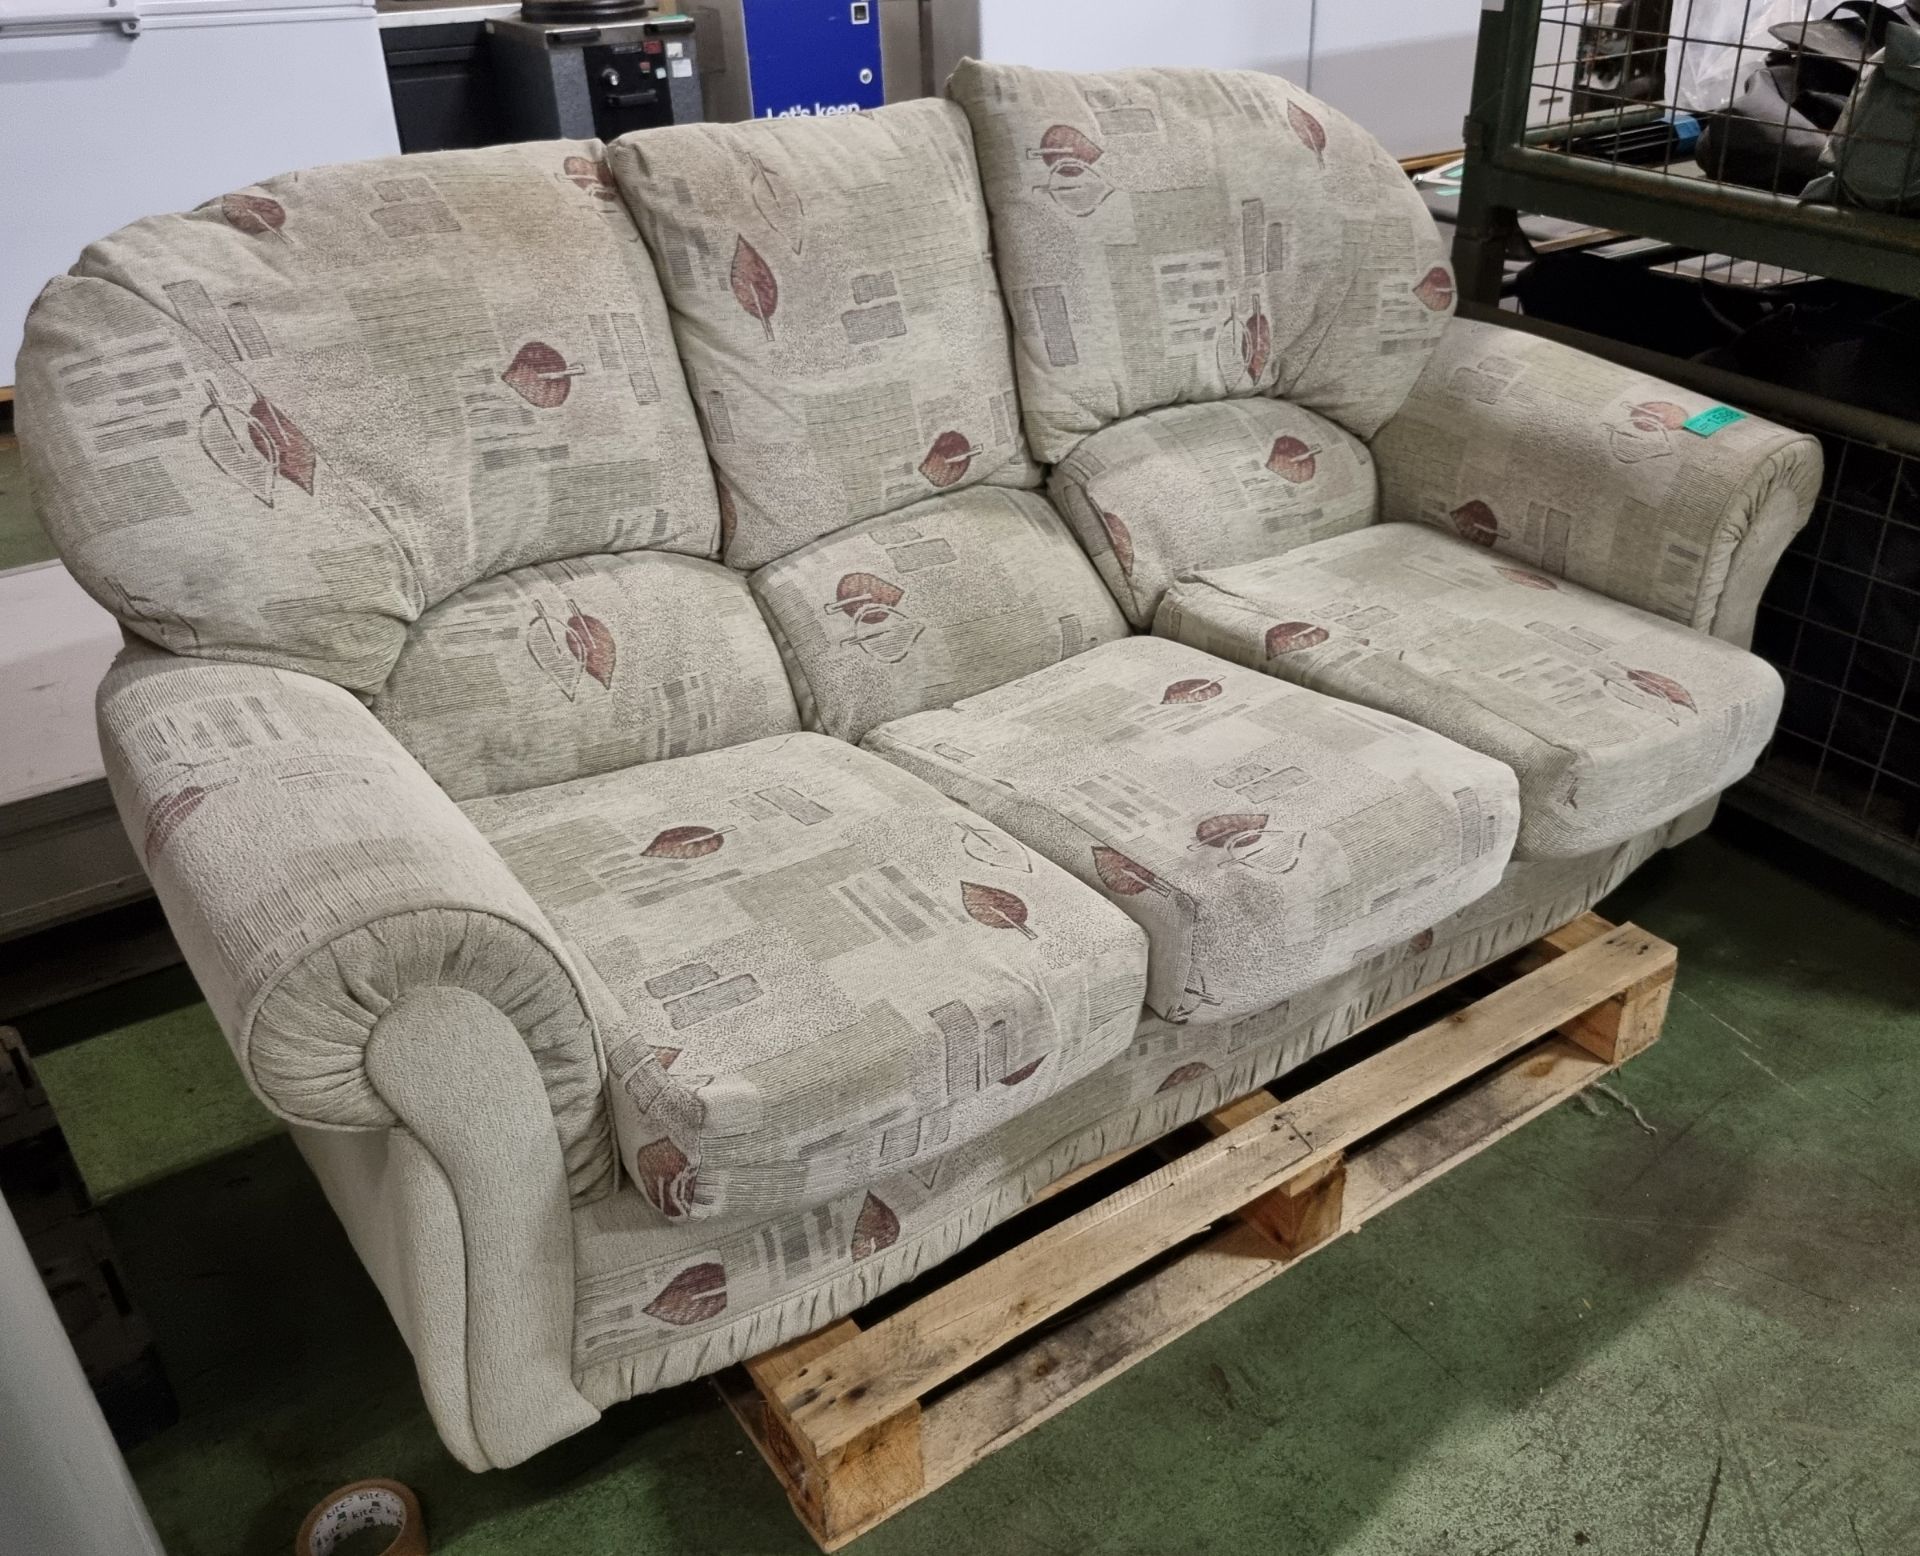 3 seater sofa - L1830 x D1000 x H900mm - Image 3 of 3